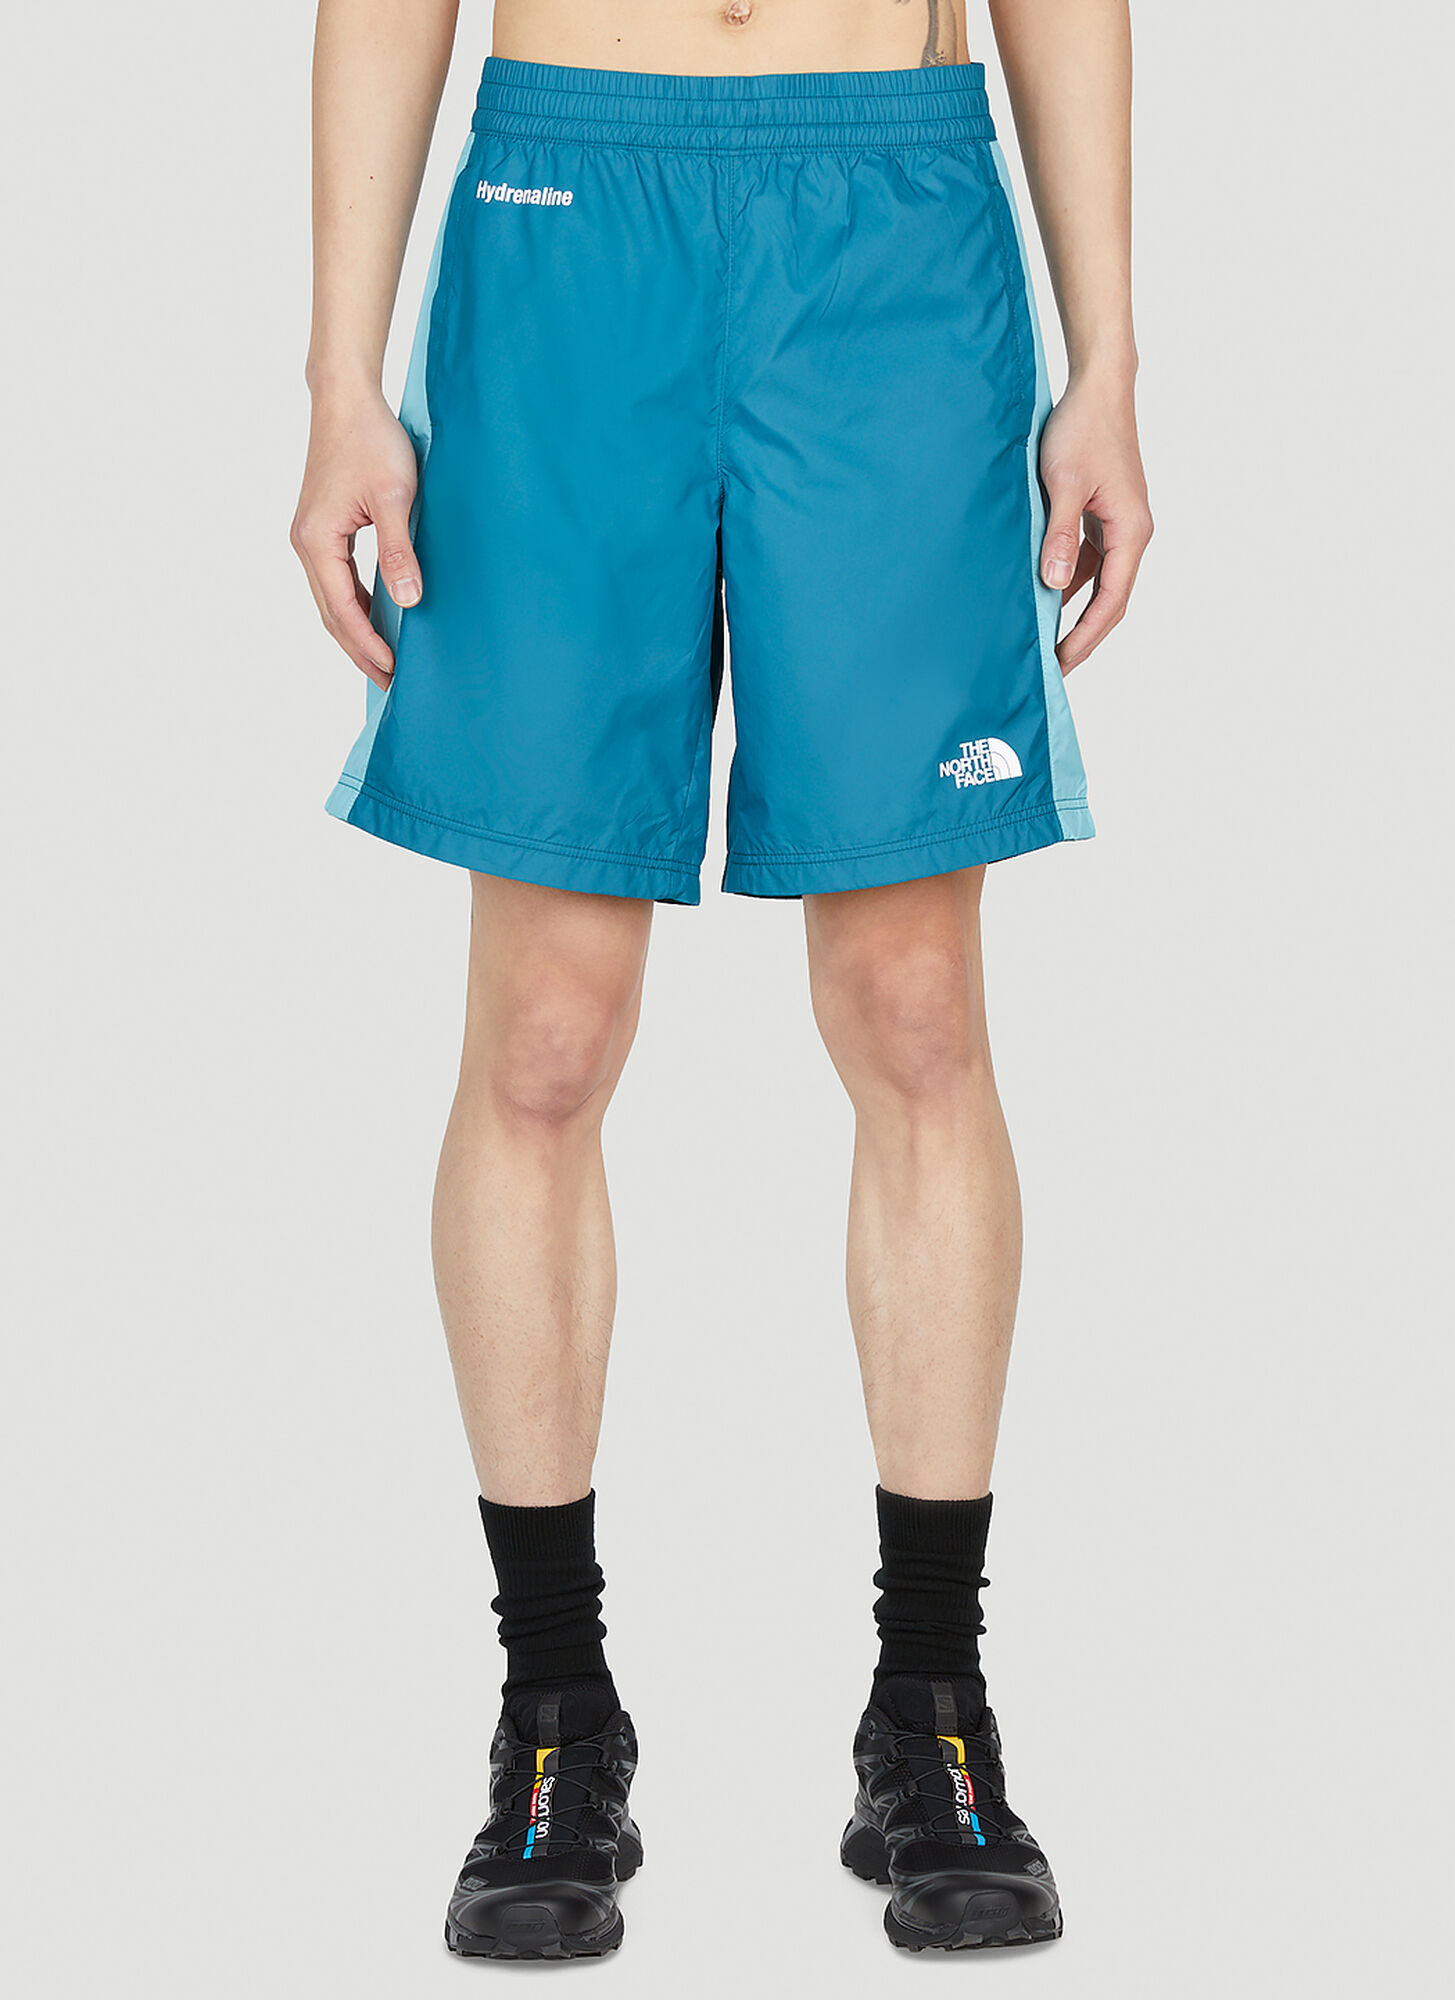 THE NORTH FACE HYDRENALINE 2000 WATER-REPELLENT SHORTS